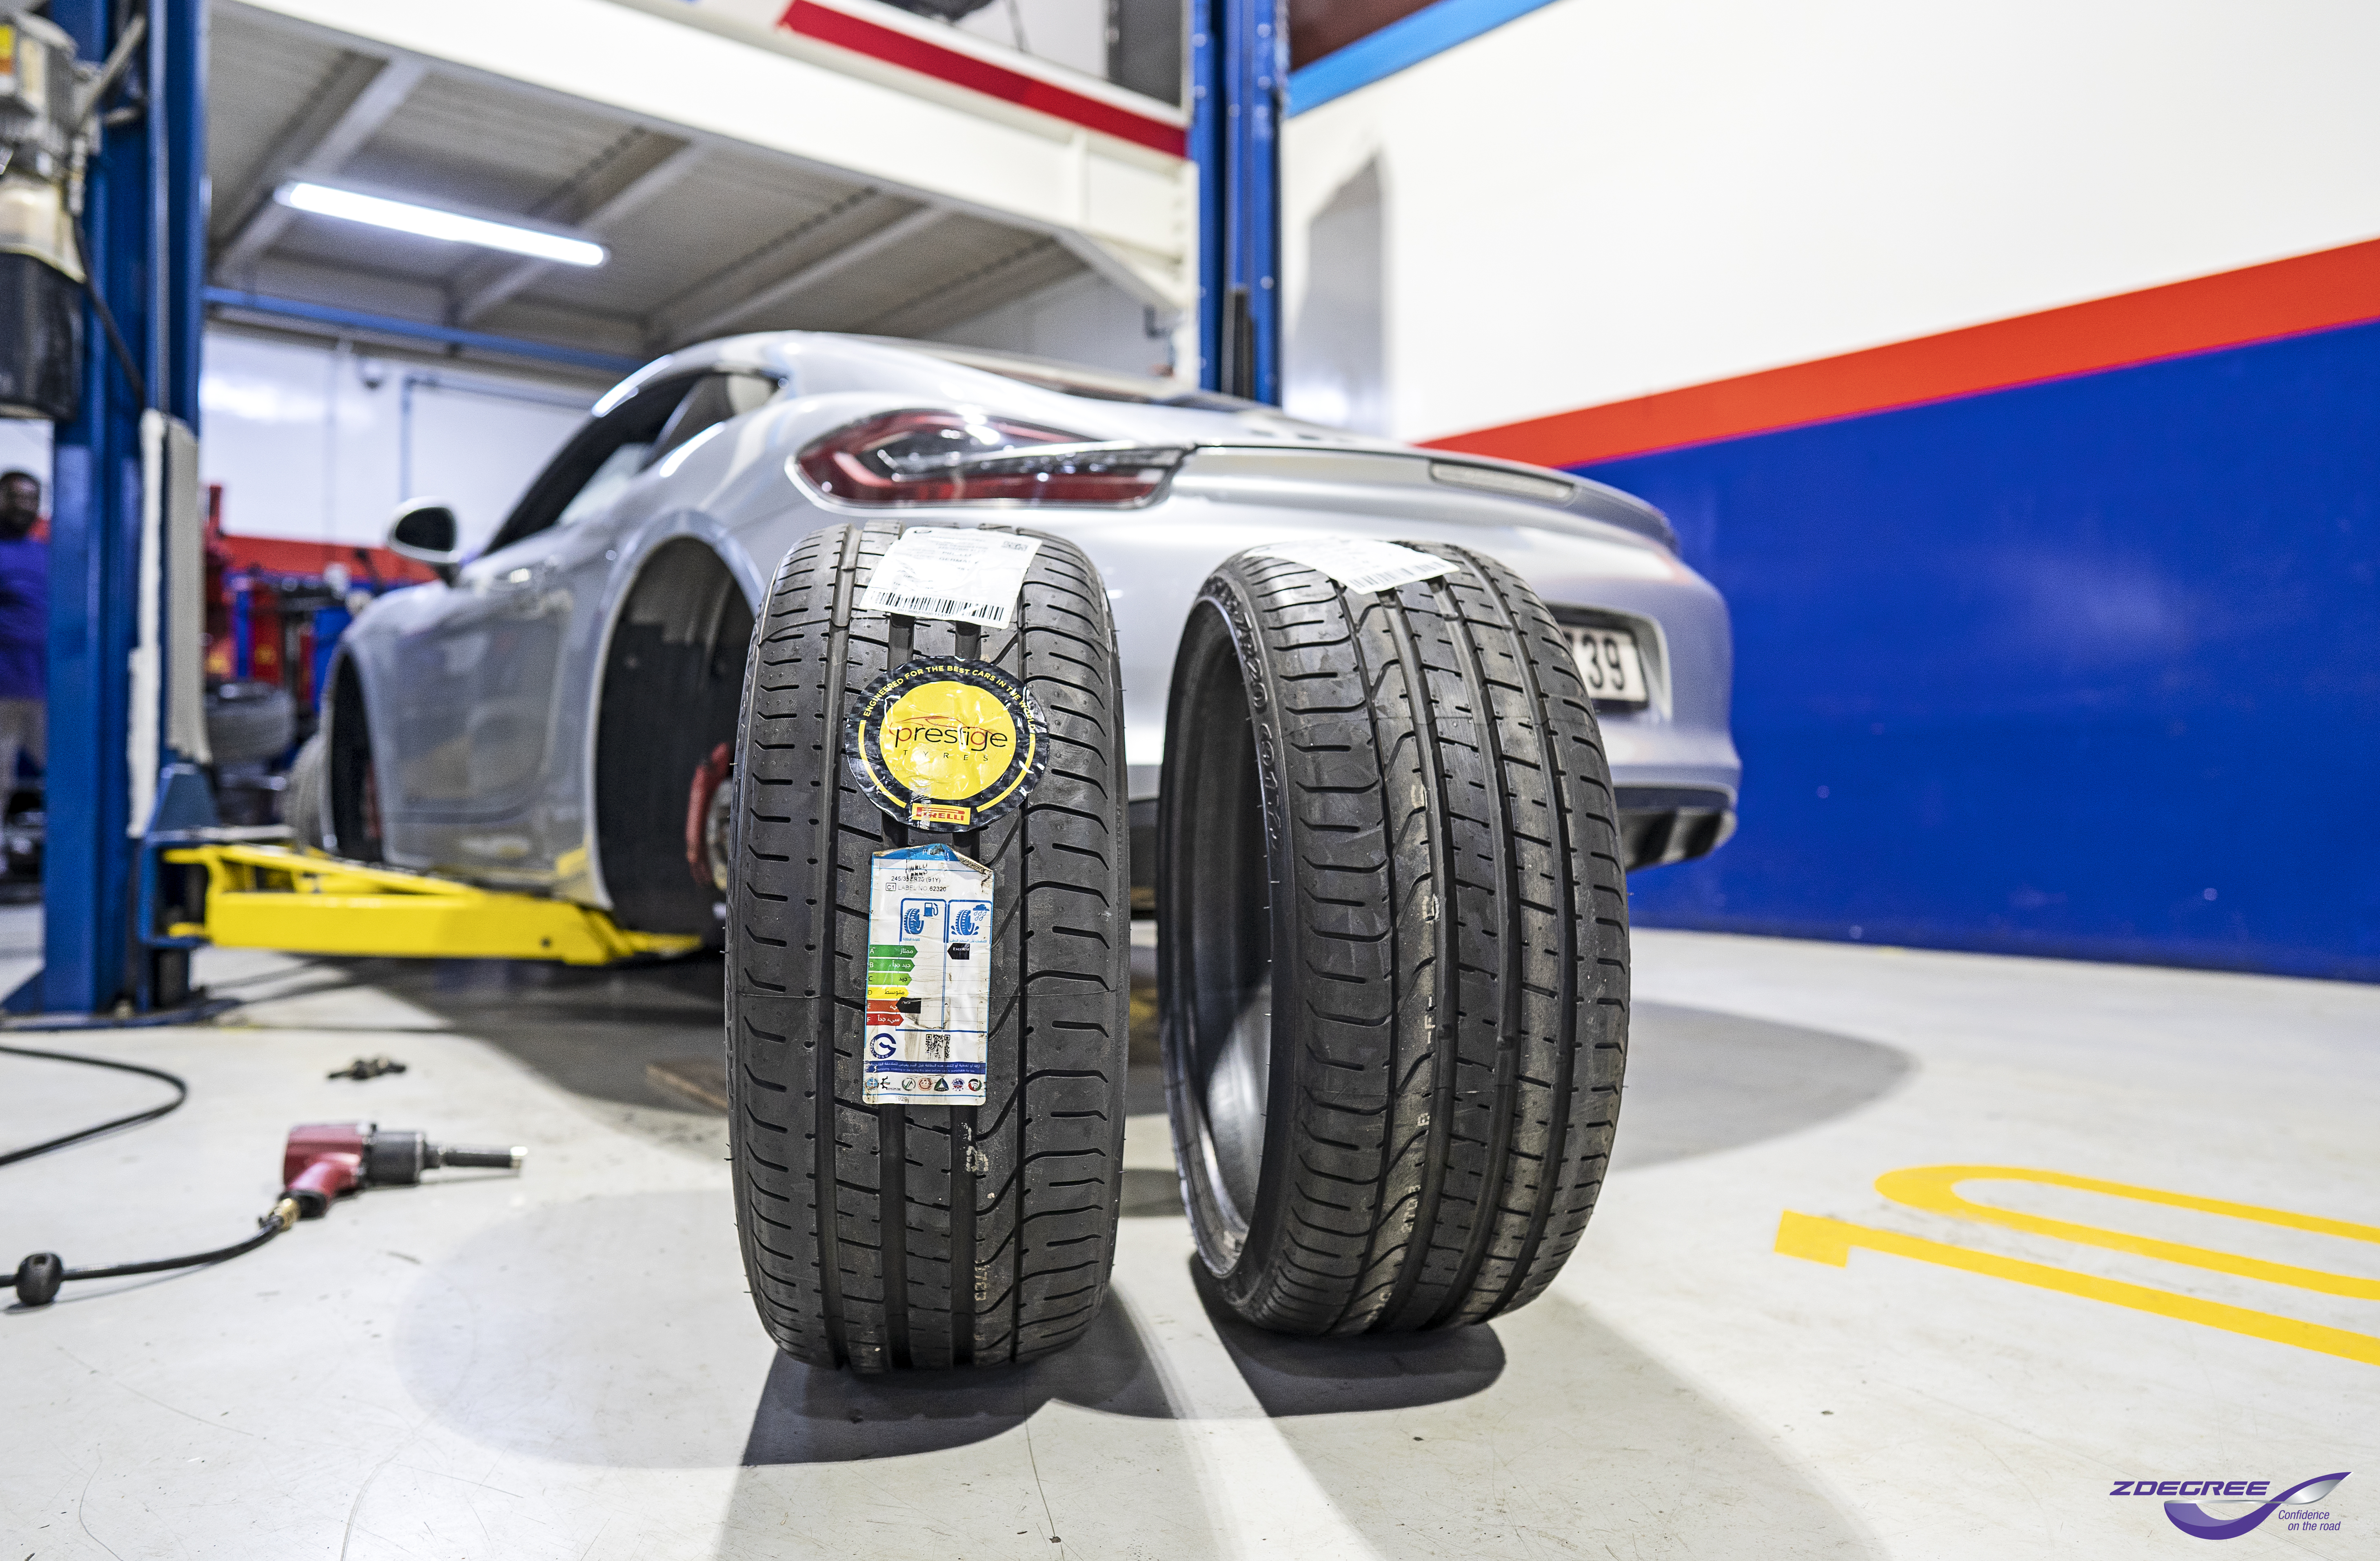 9 Must-do Pirelli Tyres Services To Get The Most Out Of The Tyres